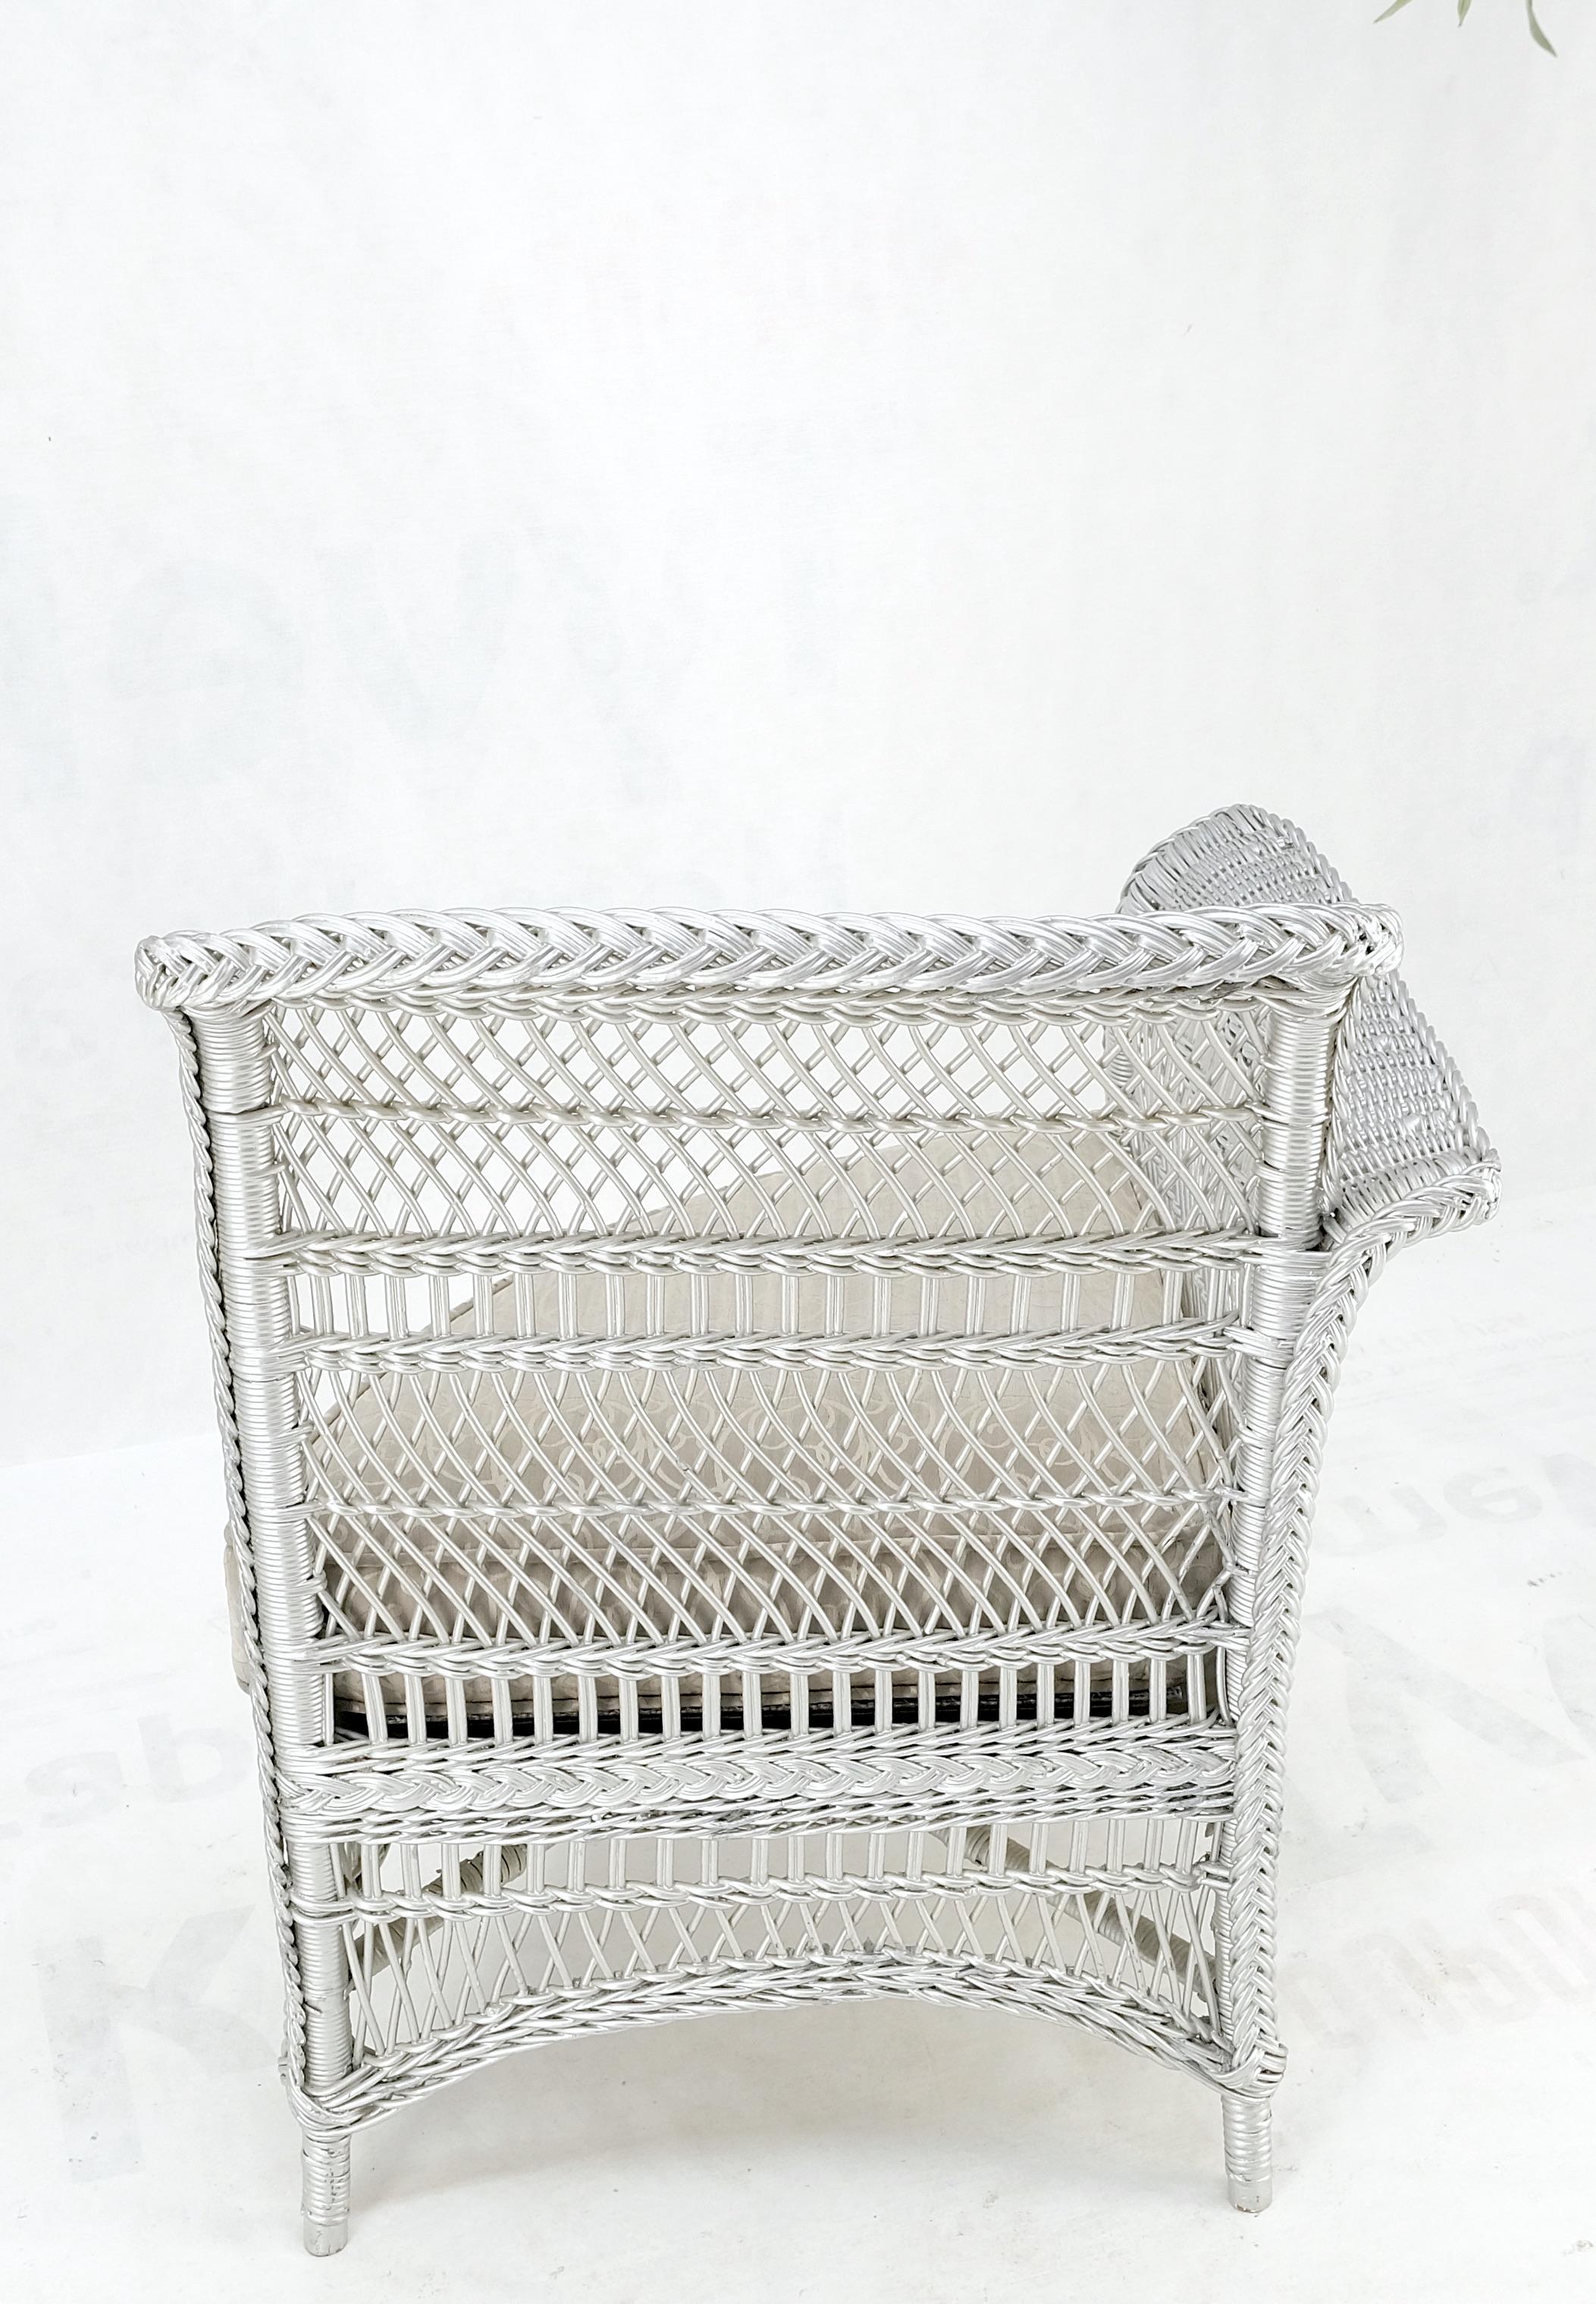 Antique Wicker Corner Chair Finished Painted in Silver Metal Finish Mint For Sale 7